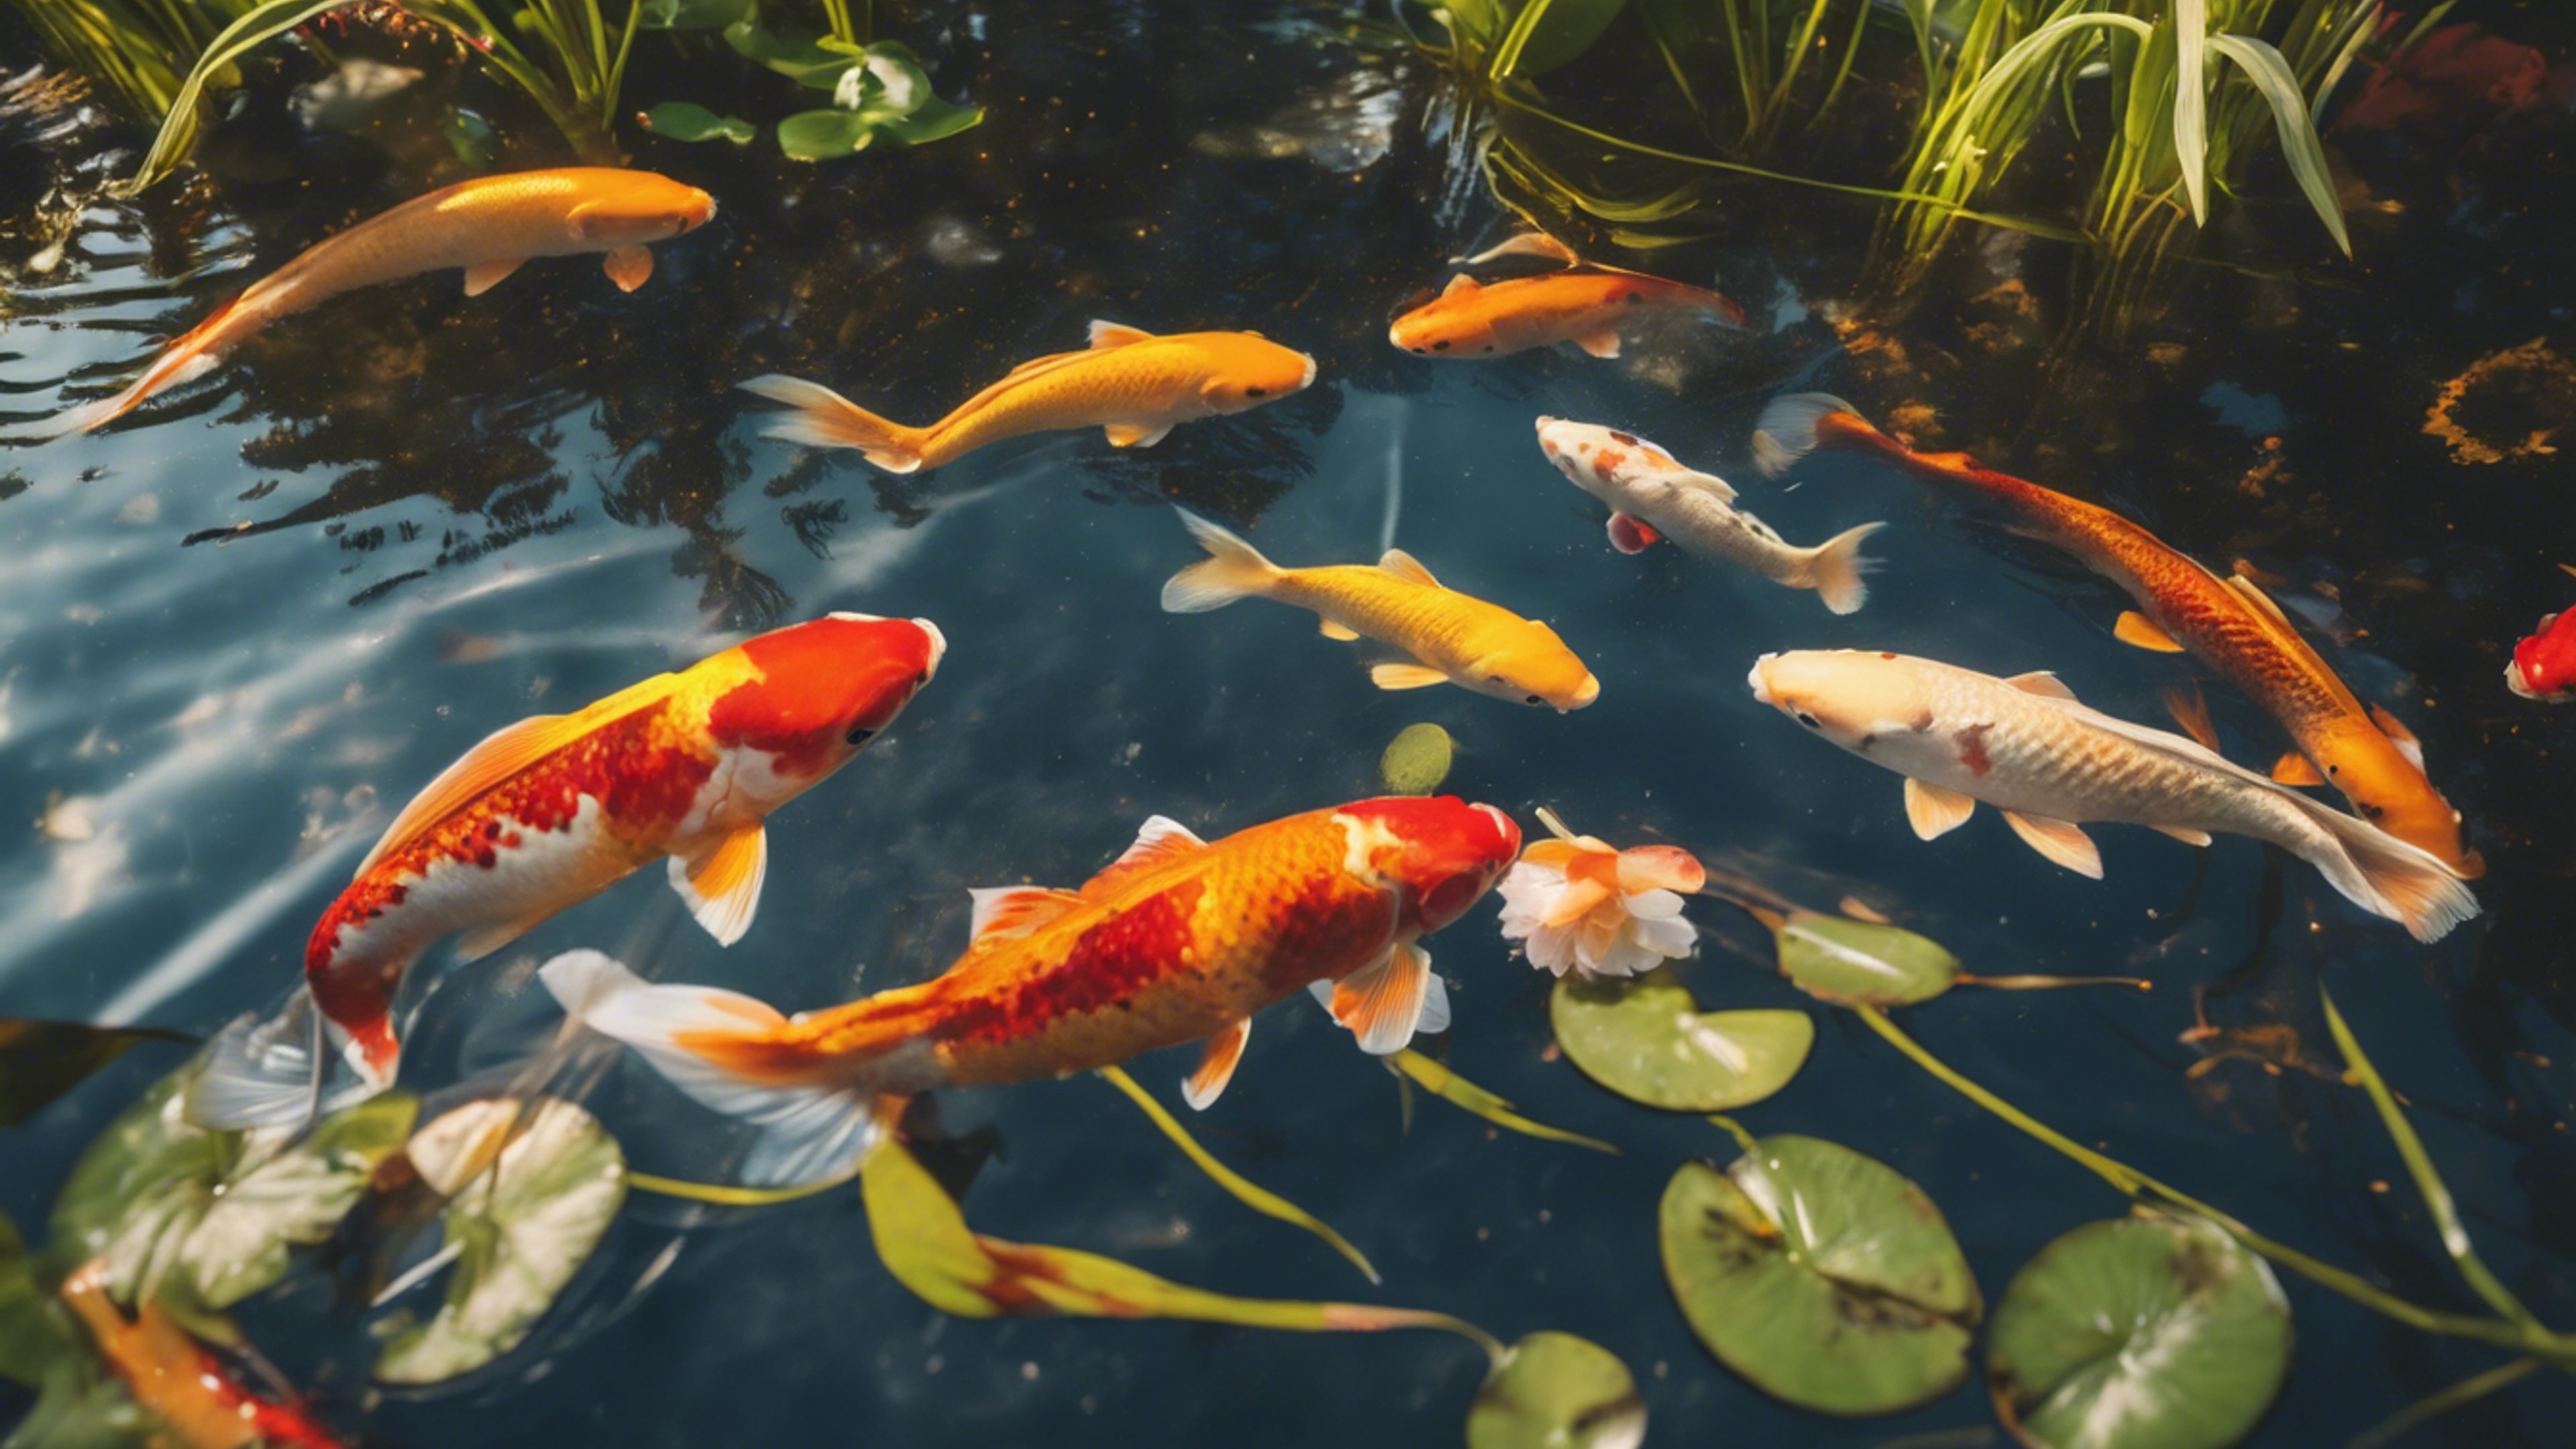 A koi pond with fish swirling under the lilies, their cool red and vibrant yellow scales shimmering under the sun. Kertas dinding[e1c53d91cfb64fffb364]